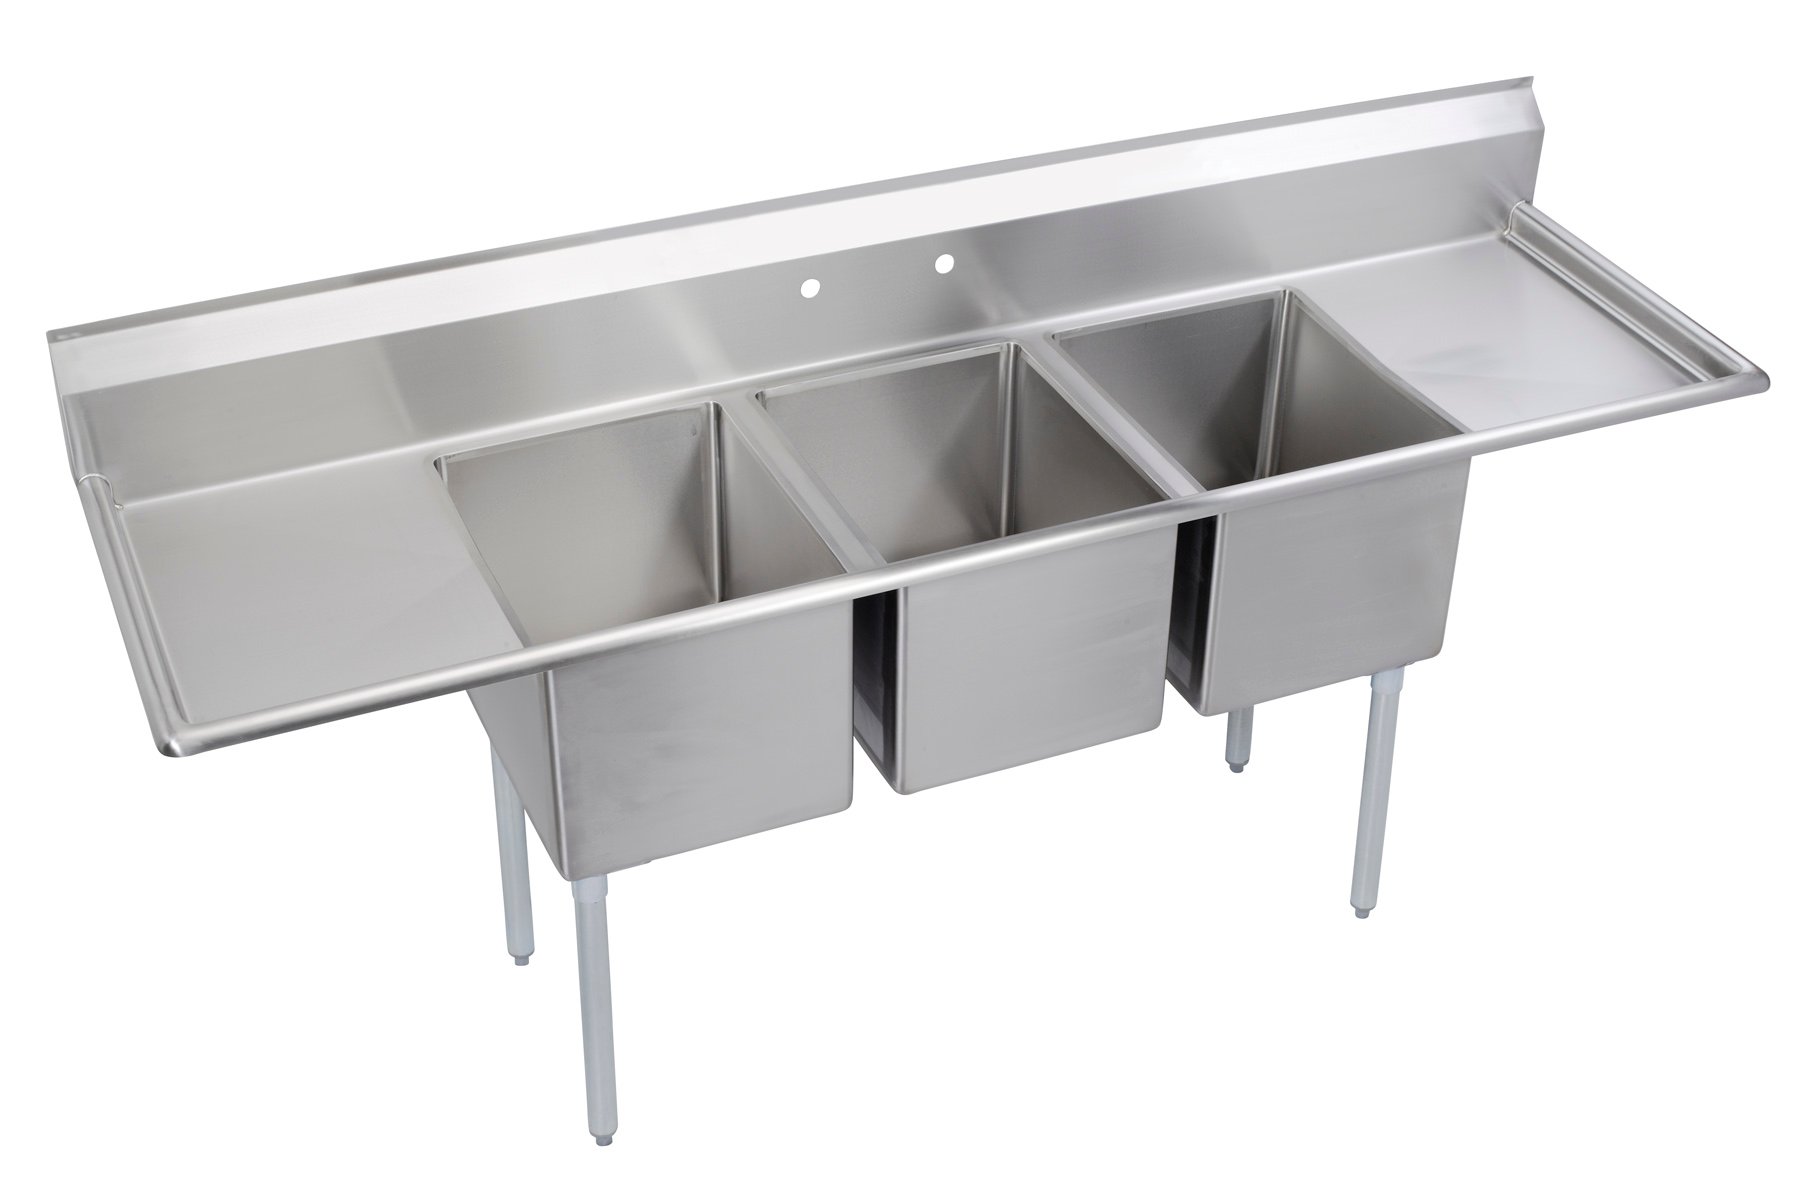 3 compartment sink for kitchen